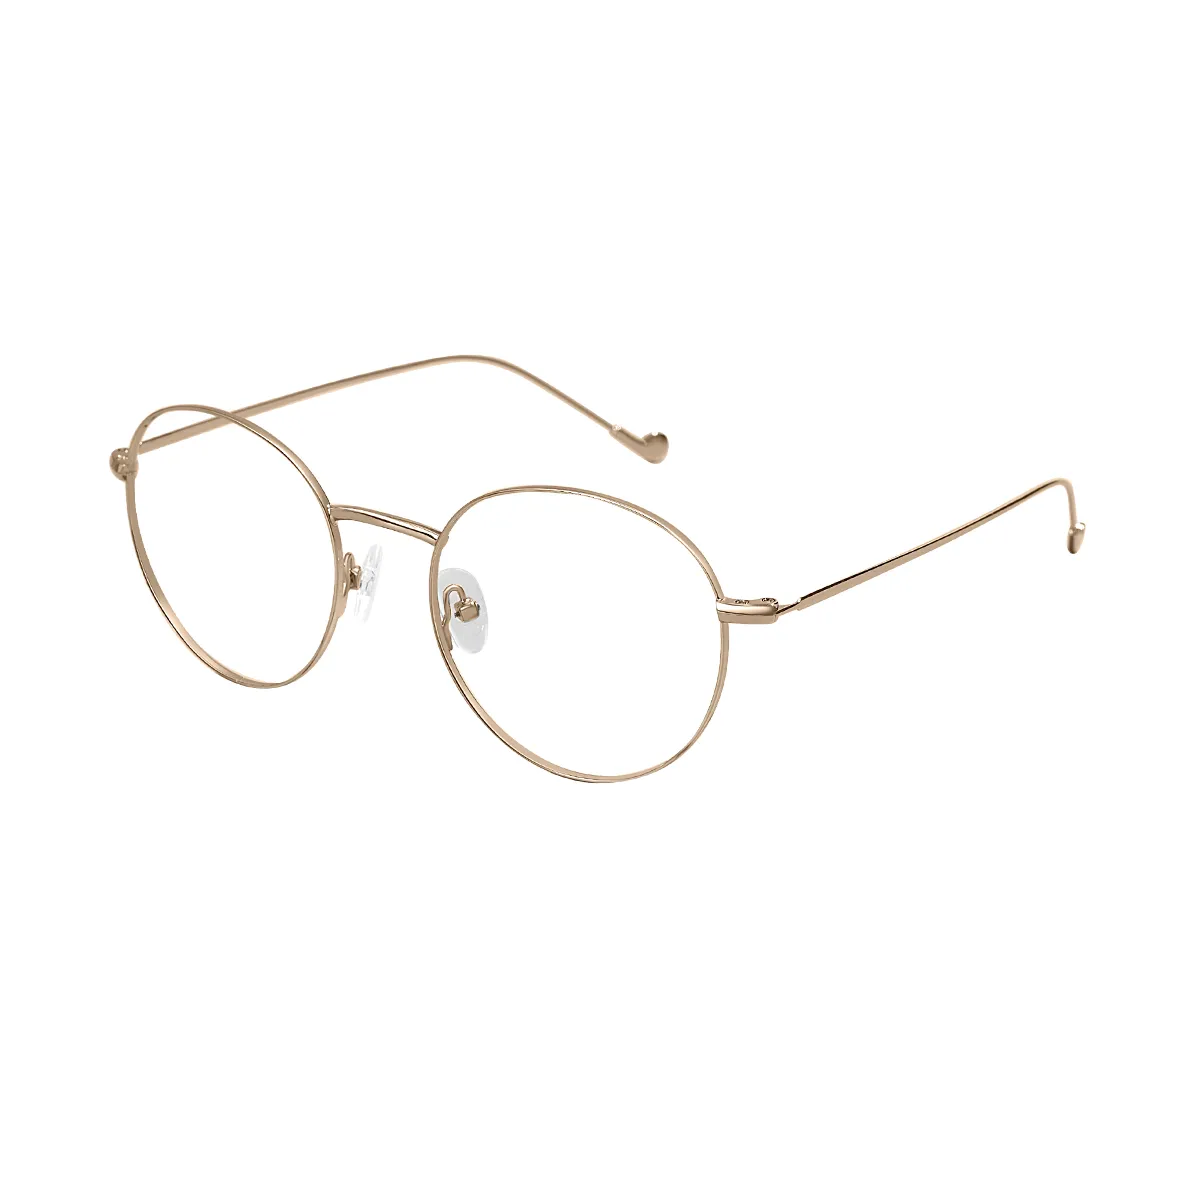 Downing - Round Gold Glasses for Men & Women